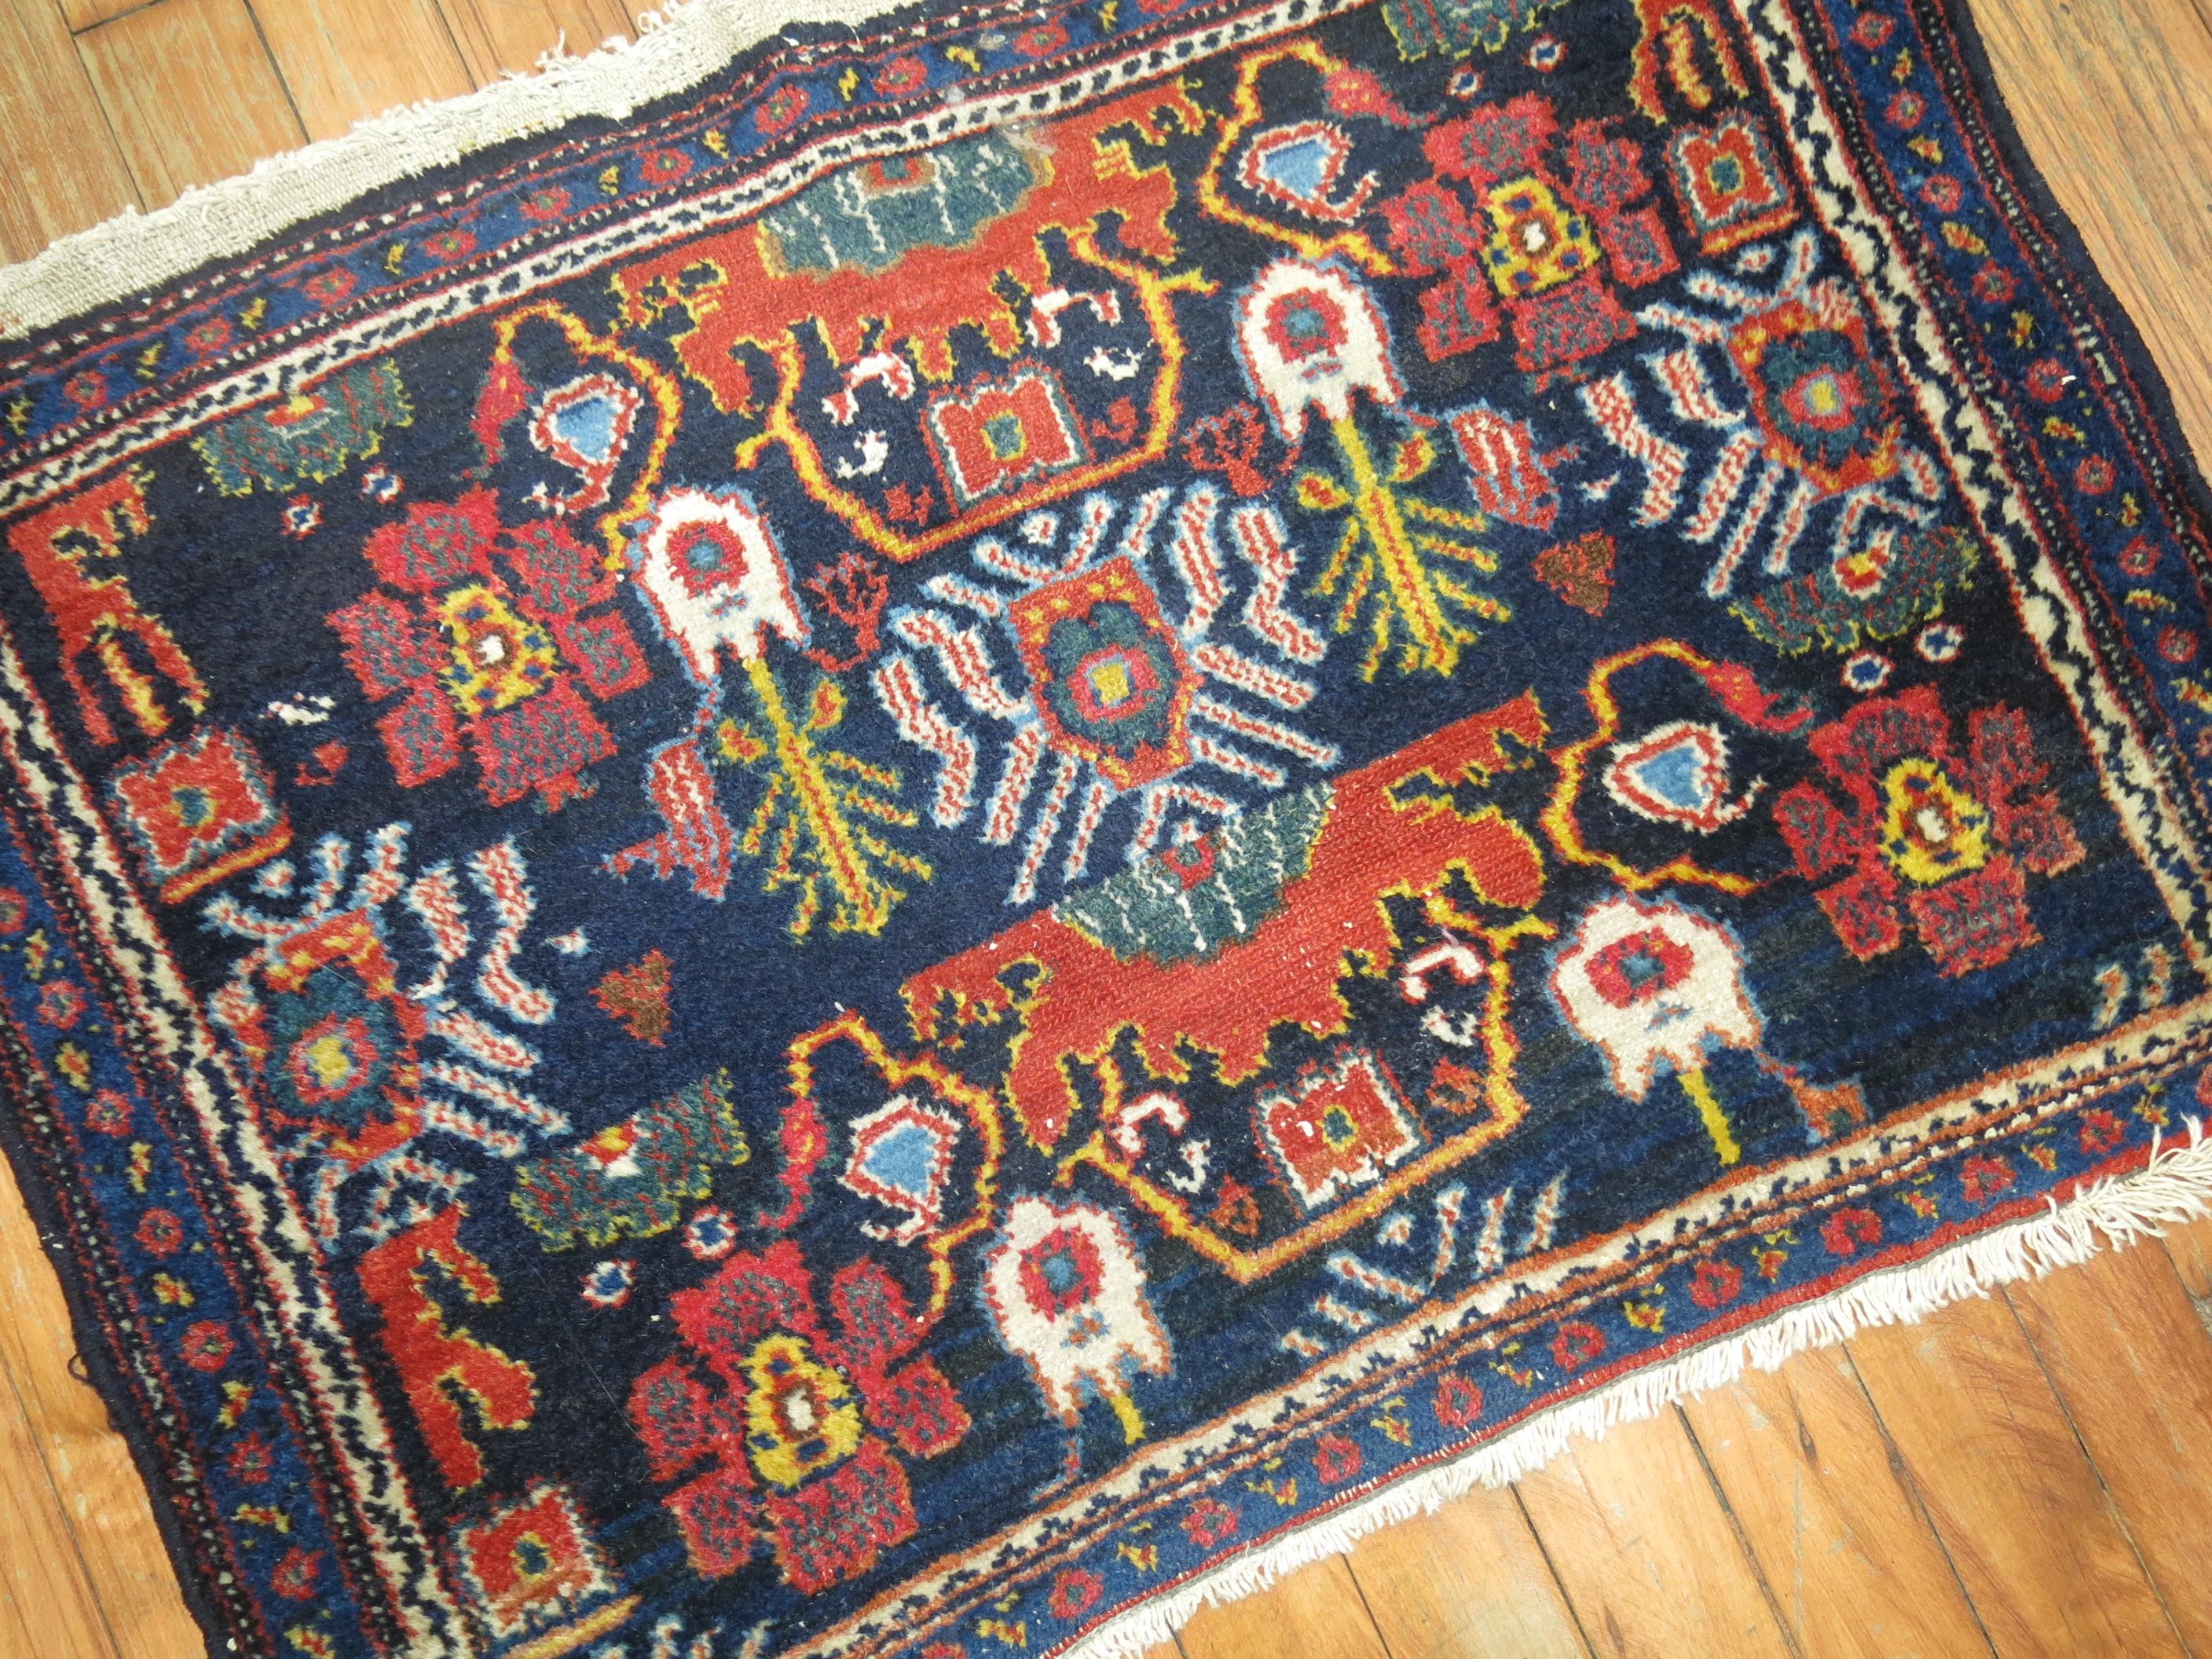 Antique Persian Senneh rug mat


Antique Senneh rugs are one of the most distinctive of all Persian rugs, even though the designs are often similar to Bidjar Rugs and Tabriz Rugs but just touching the rugs. Antique Senneh rugs use very tightly